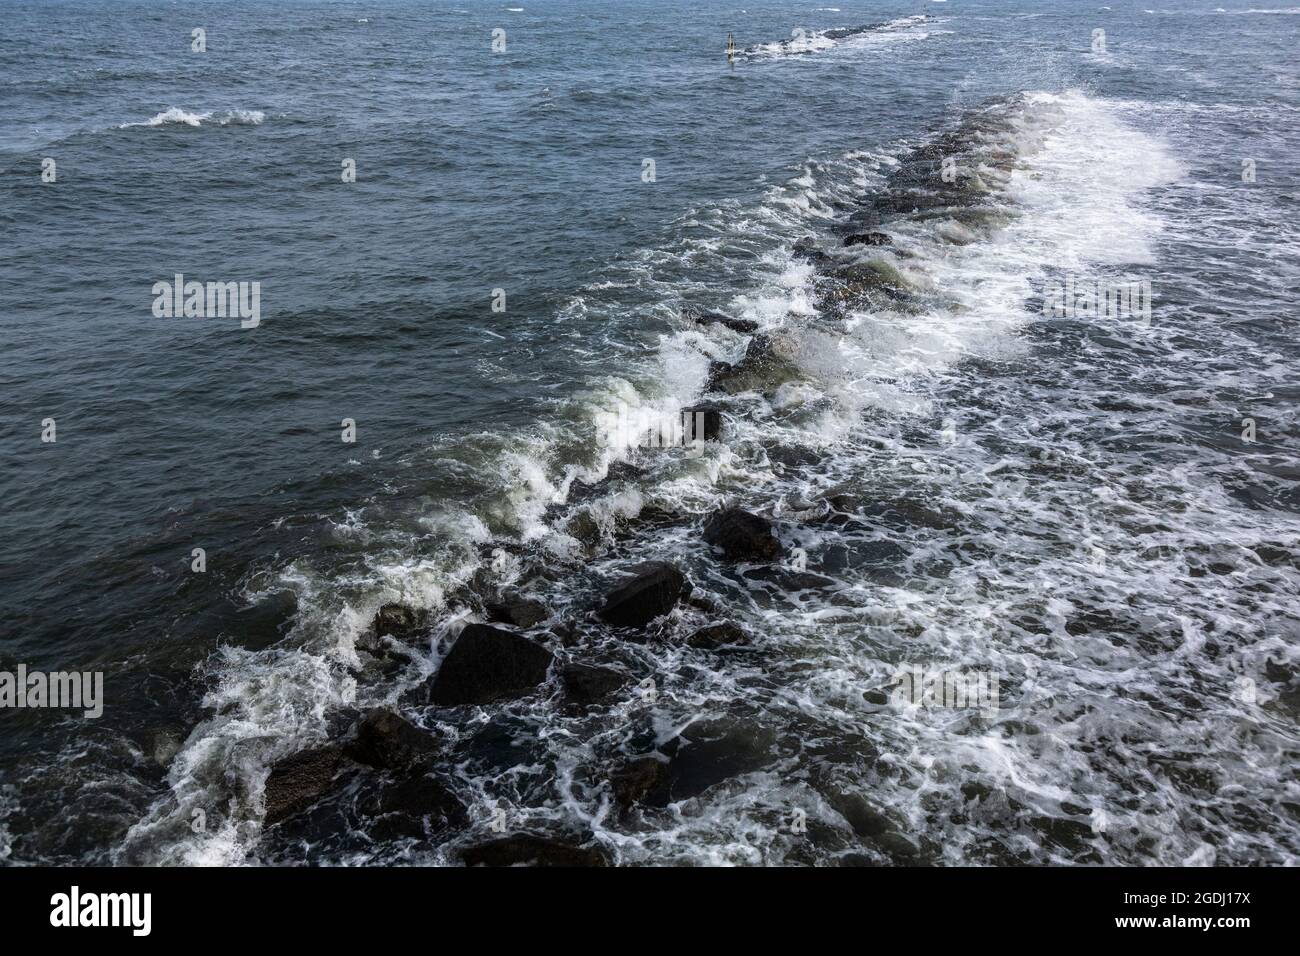 The Baltic Sea water washes over a breakwater made of stones and forms agitated and calm water. Stock Photo